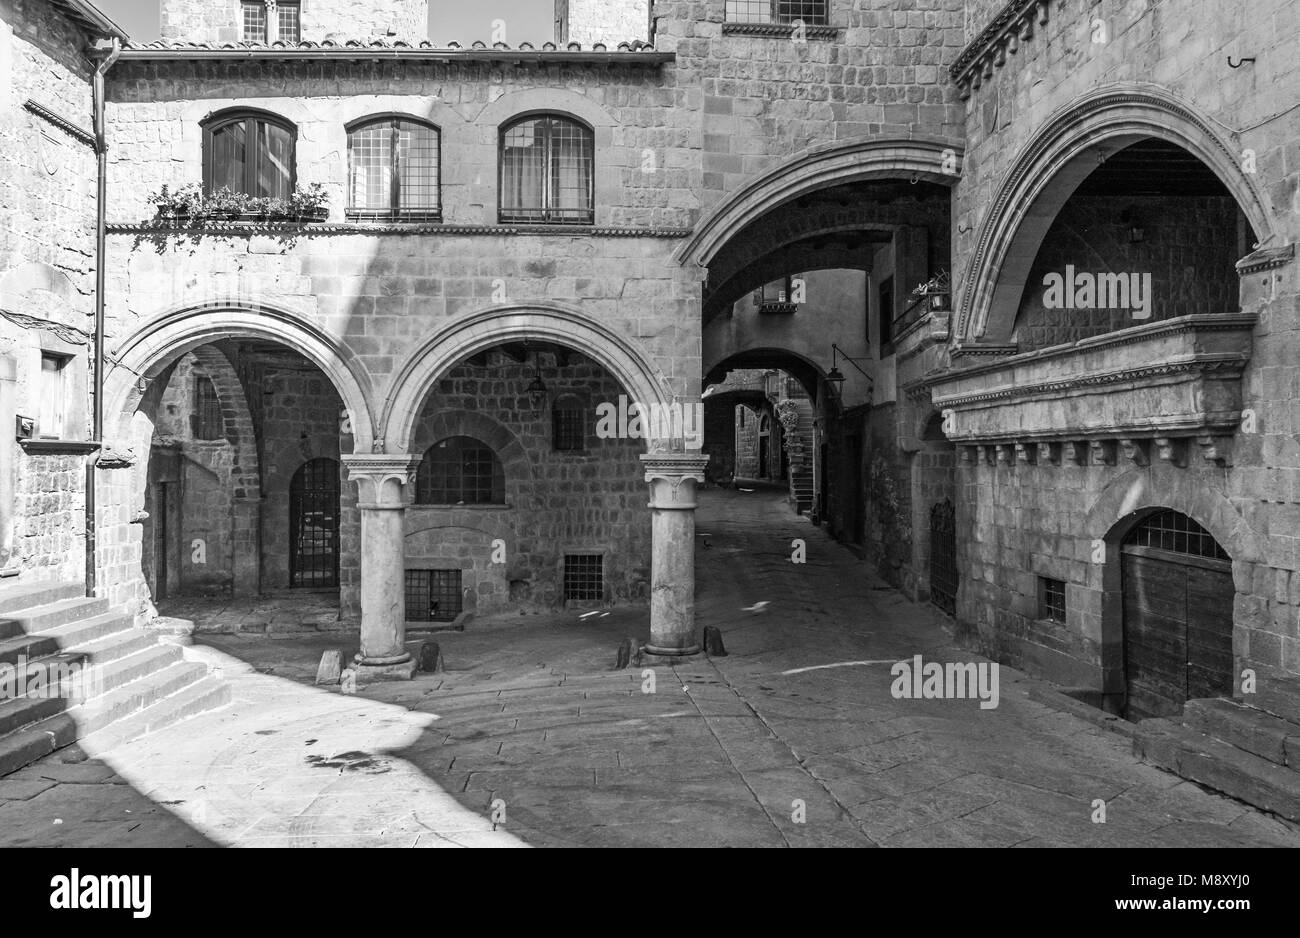 Viterbo, Italy - The medieval city of the Lazio region. Here the ...